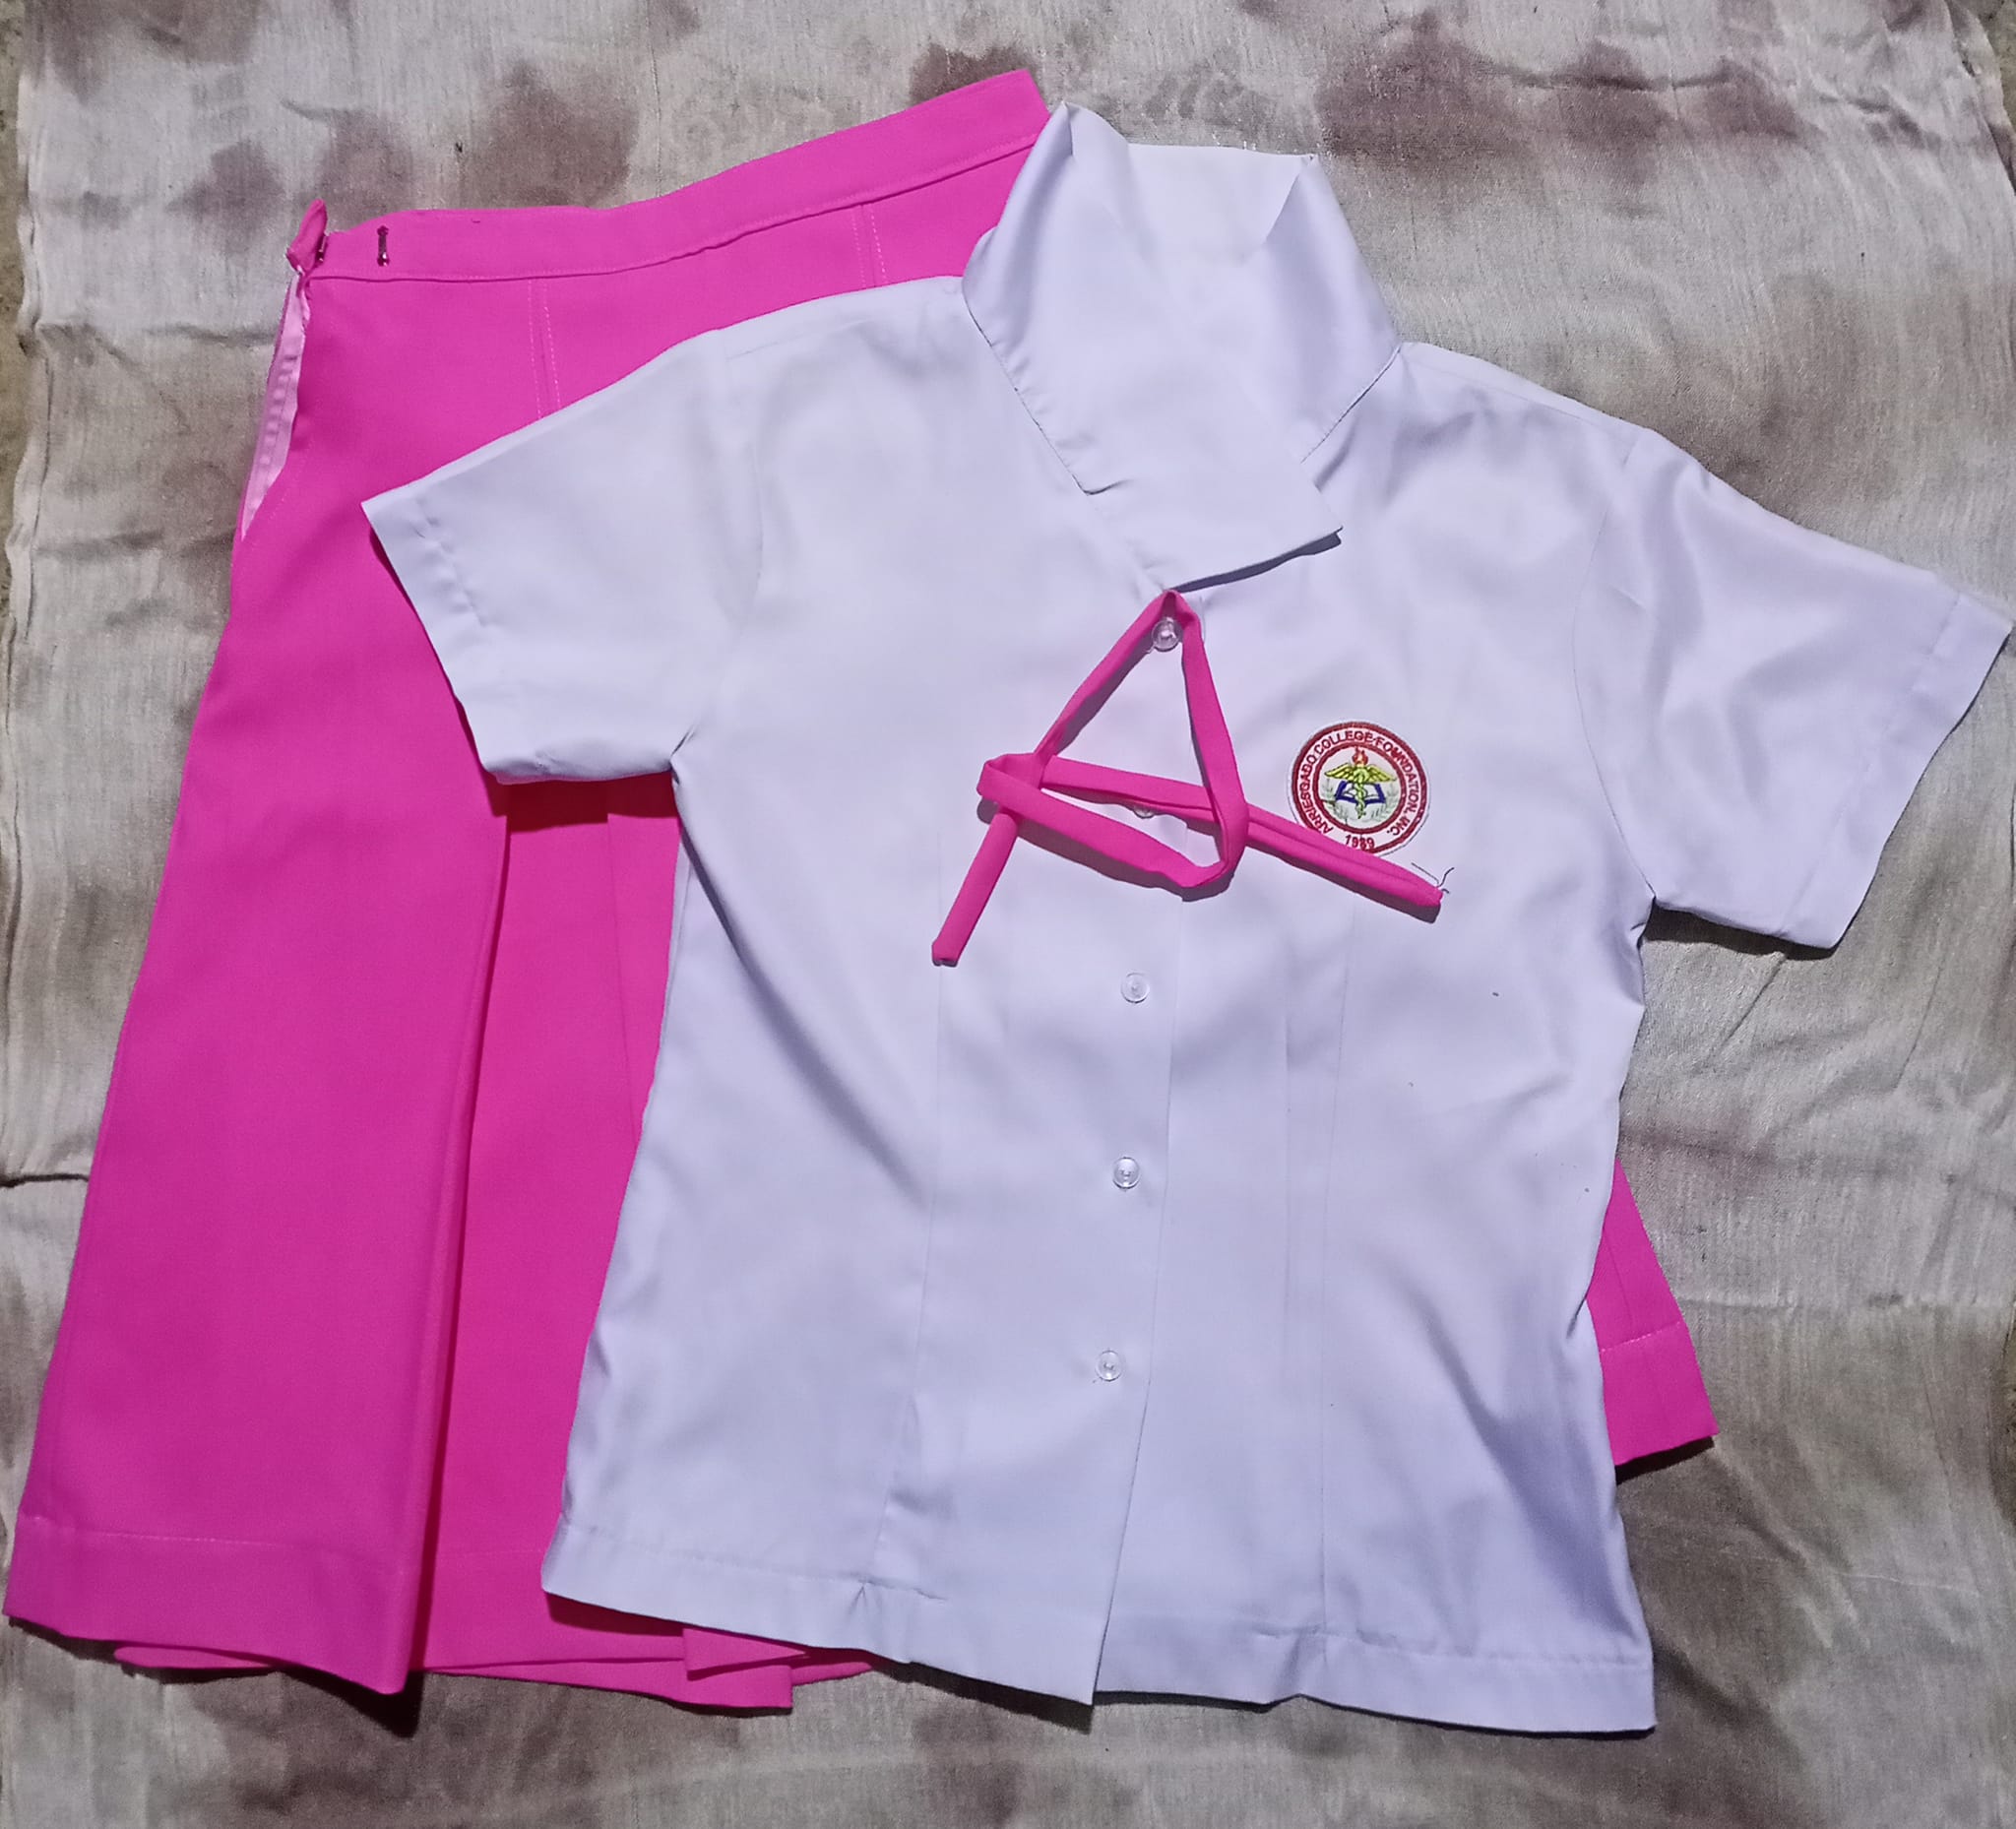 You are currently viewing Uniform for ACFI (Arriesgado College Foundation Inc)